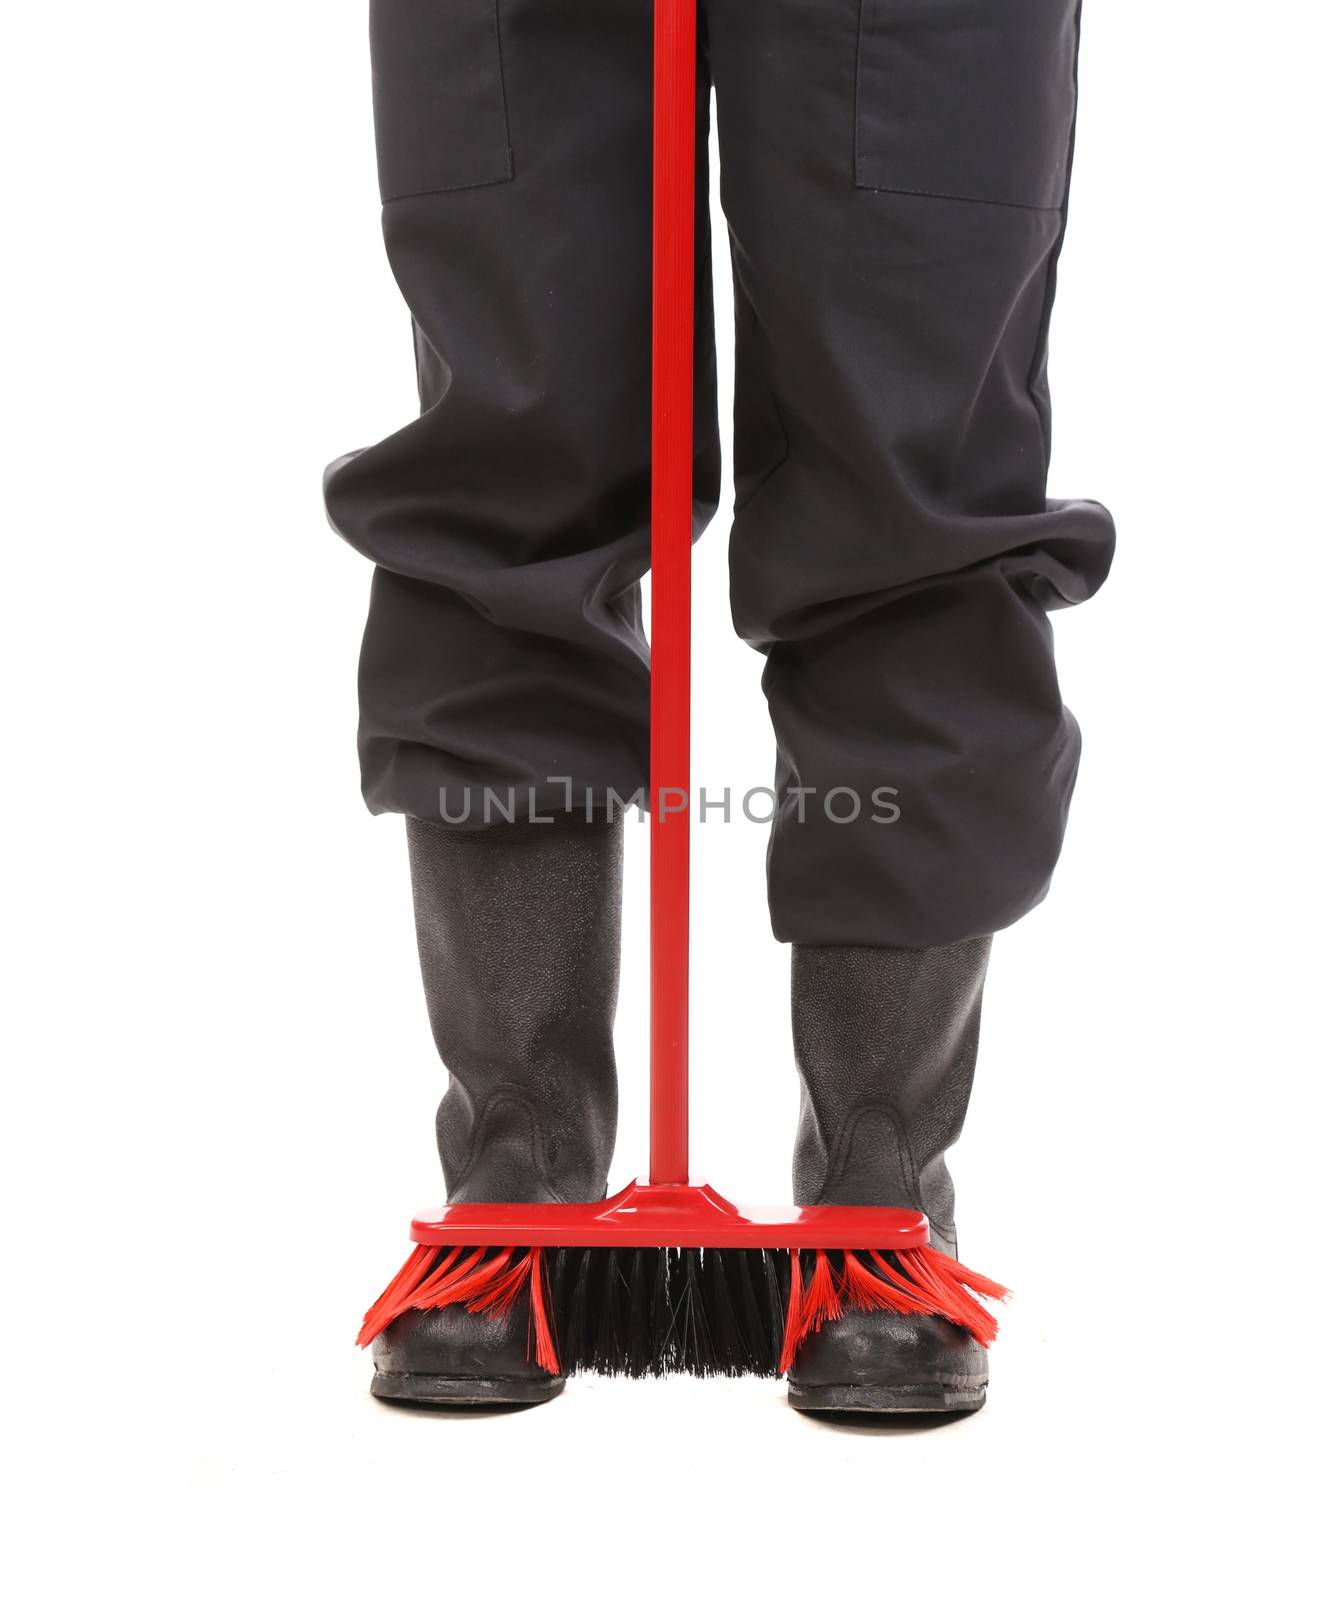 Legs and red mop. Isolated on a white background.